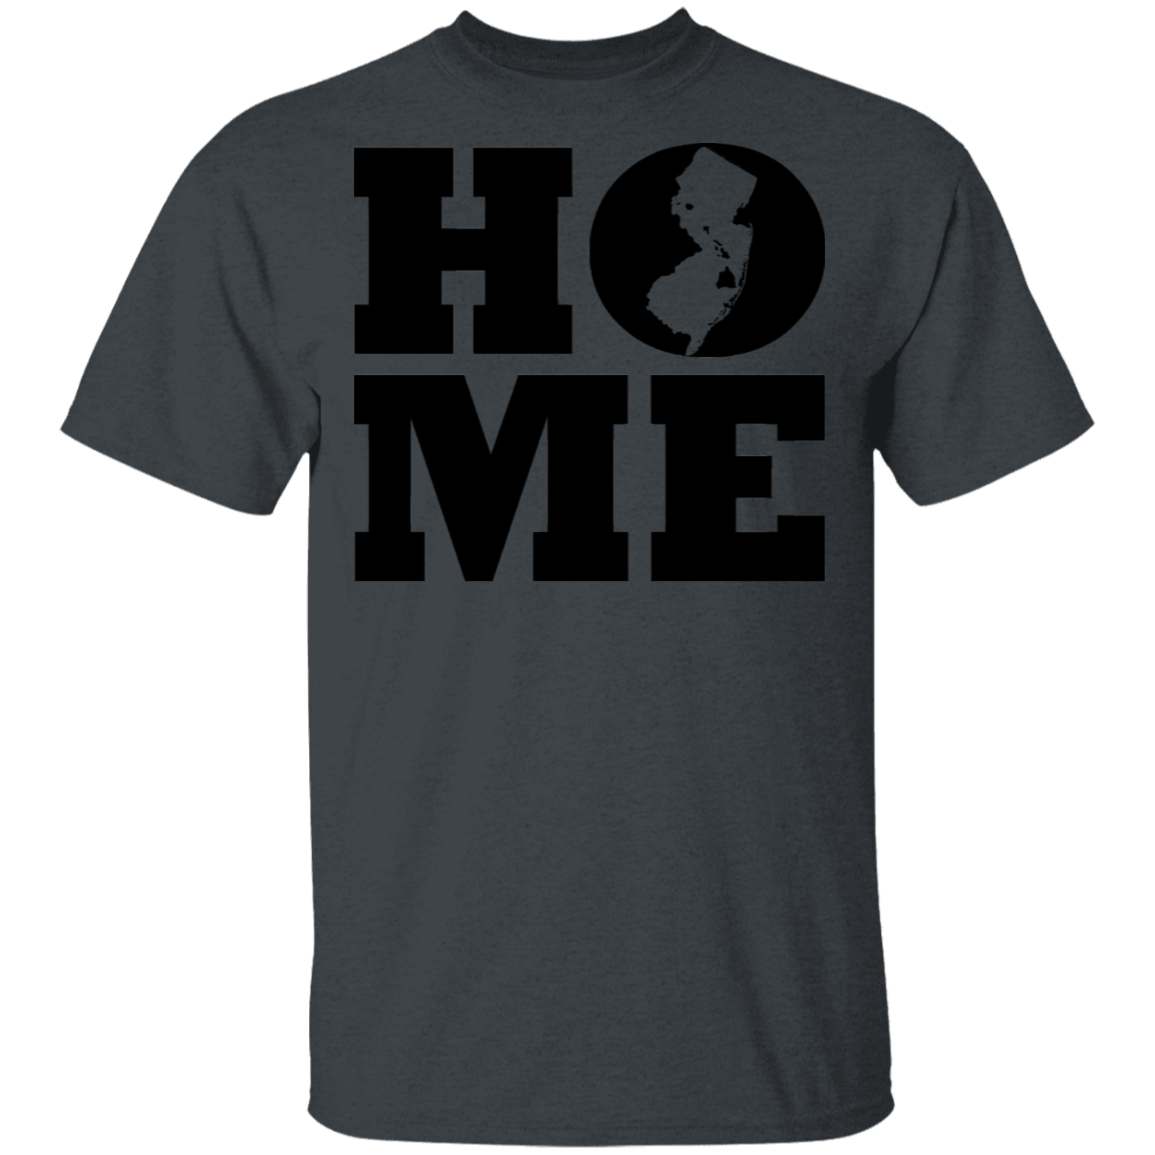 Home Roots Hawai'i and New Jersey T-Shirt